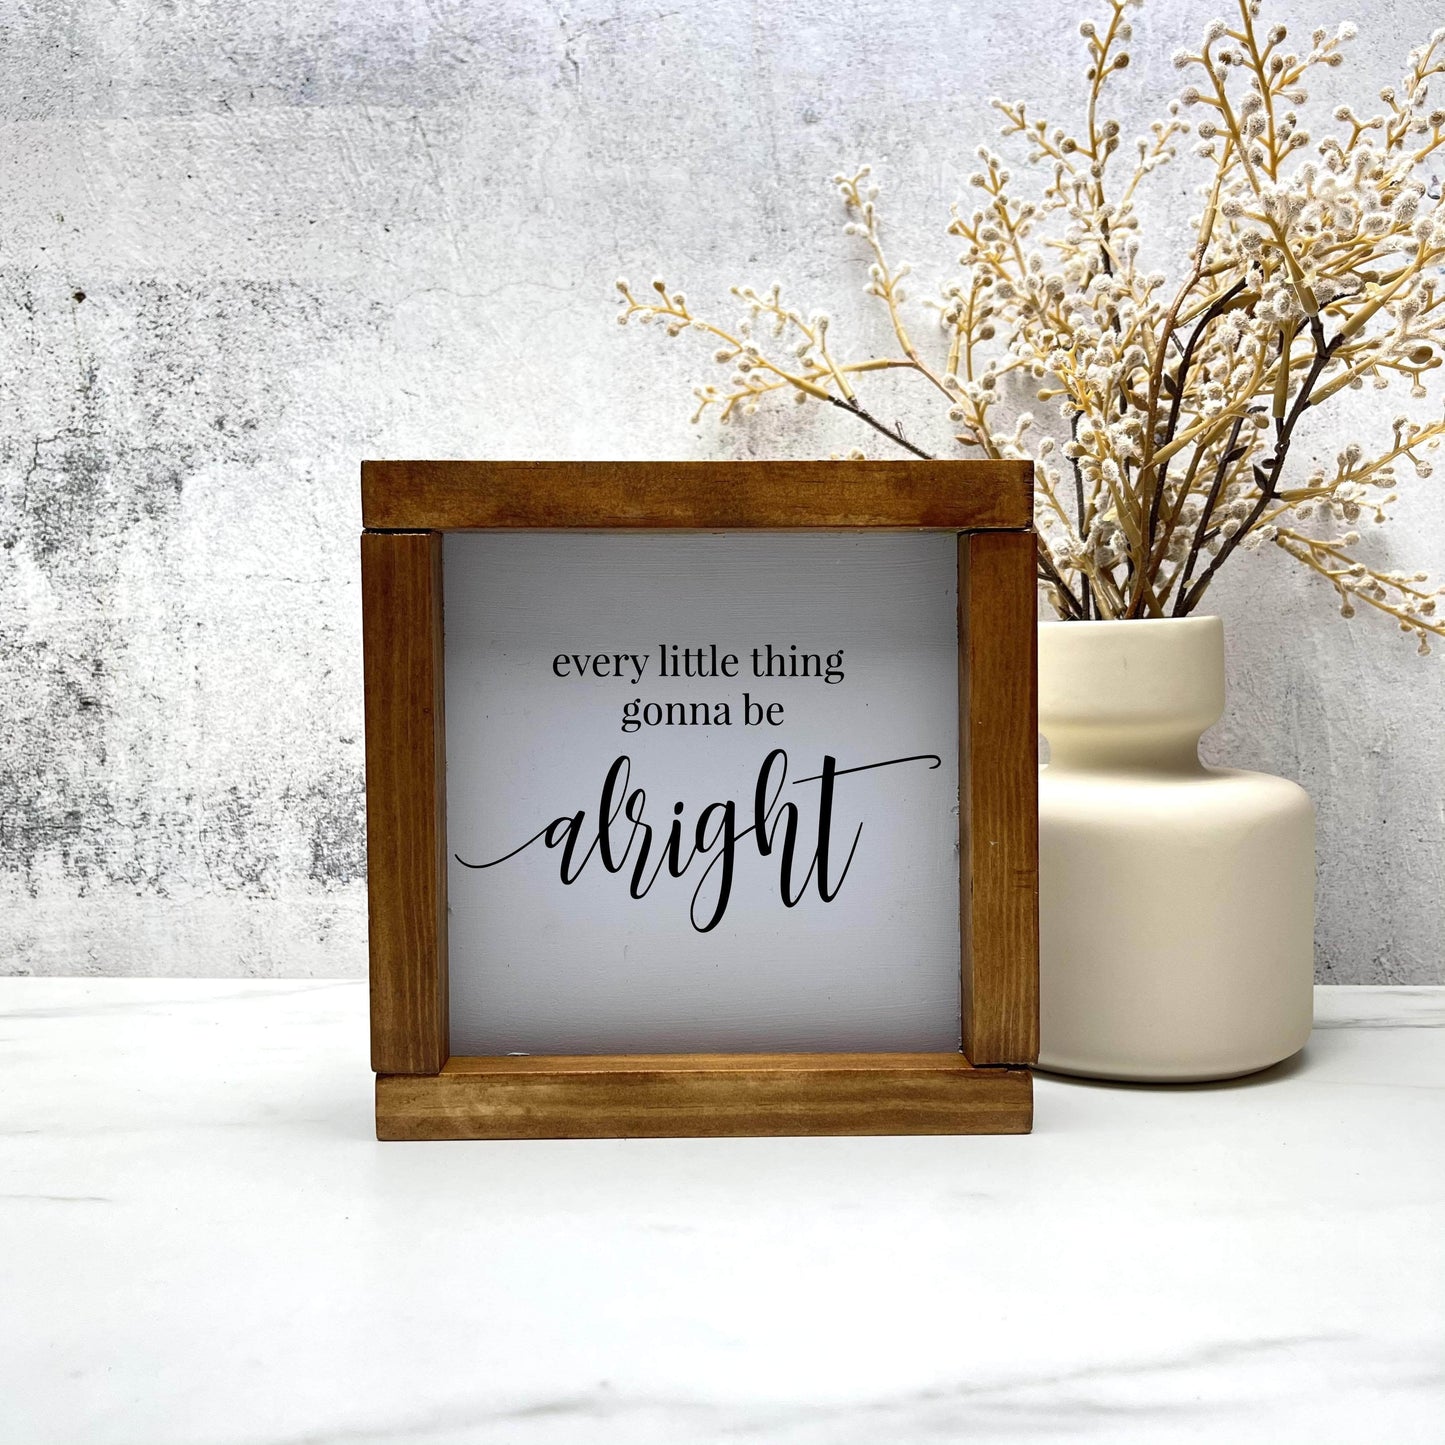 Every little thing is gonna be alright framed wood sign, farmhouse sign, rustic decor, home decor